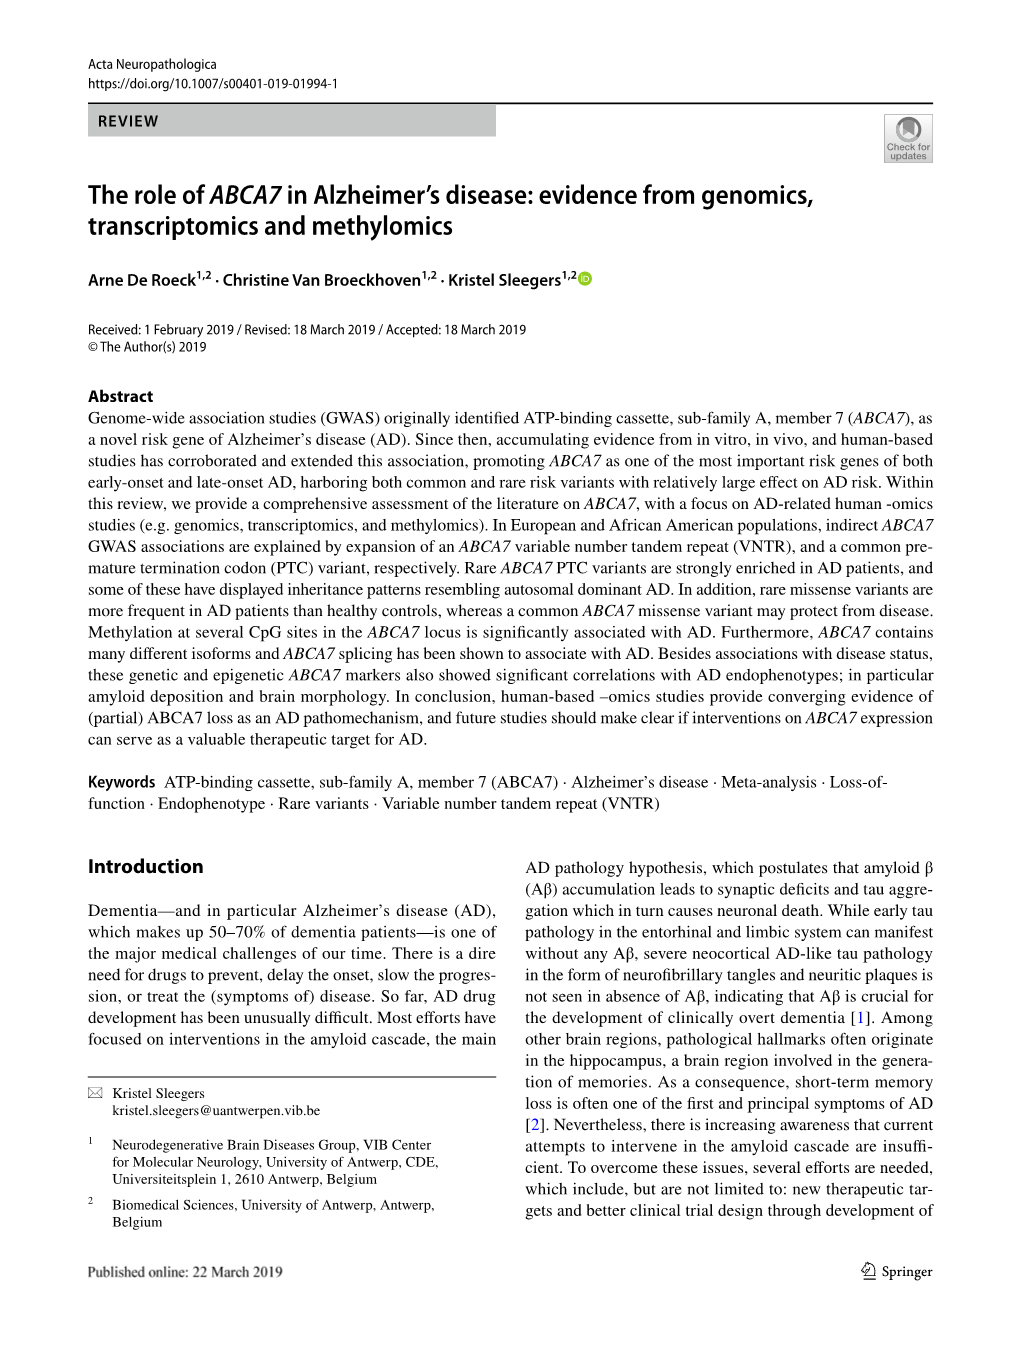 The Role of ABCA7 in Alzheimer's Disease: Evidence from Genomics